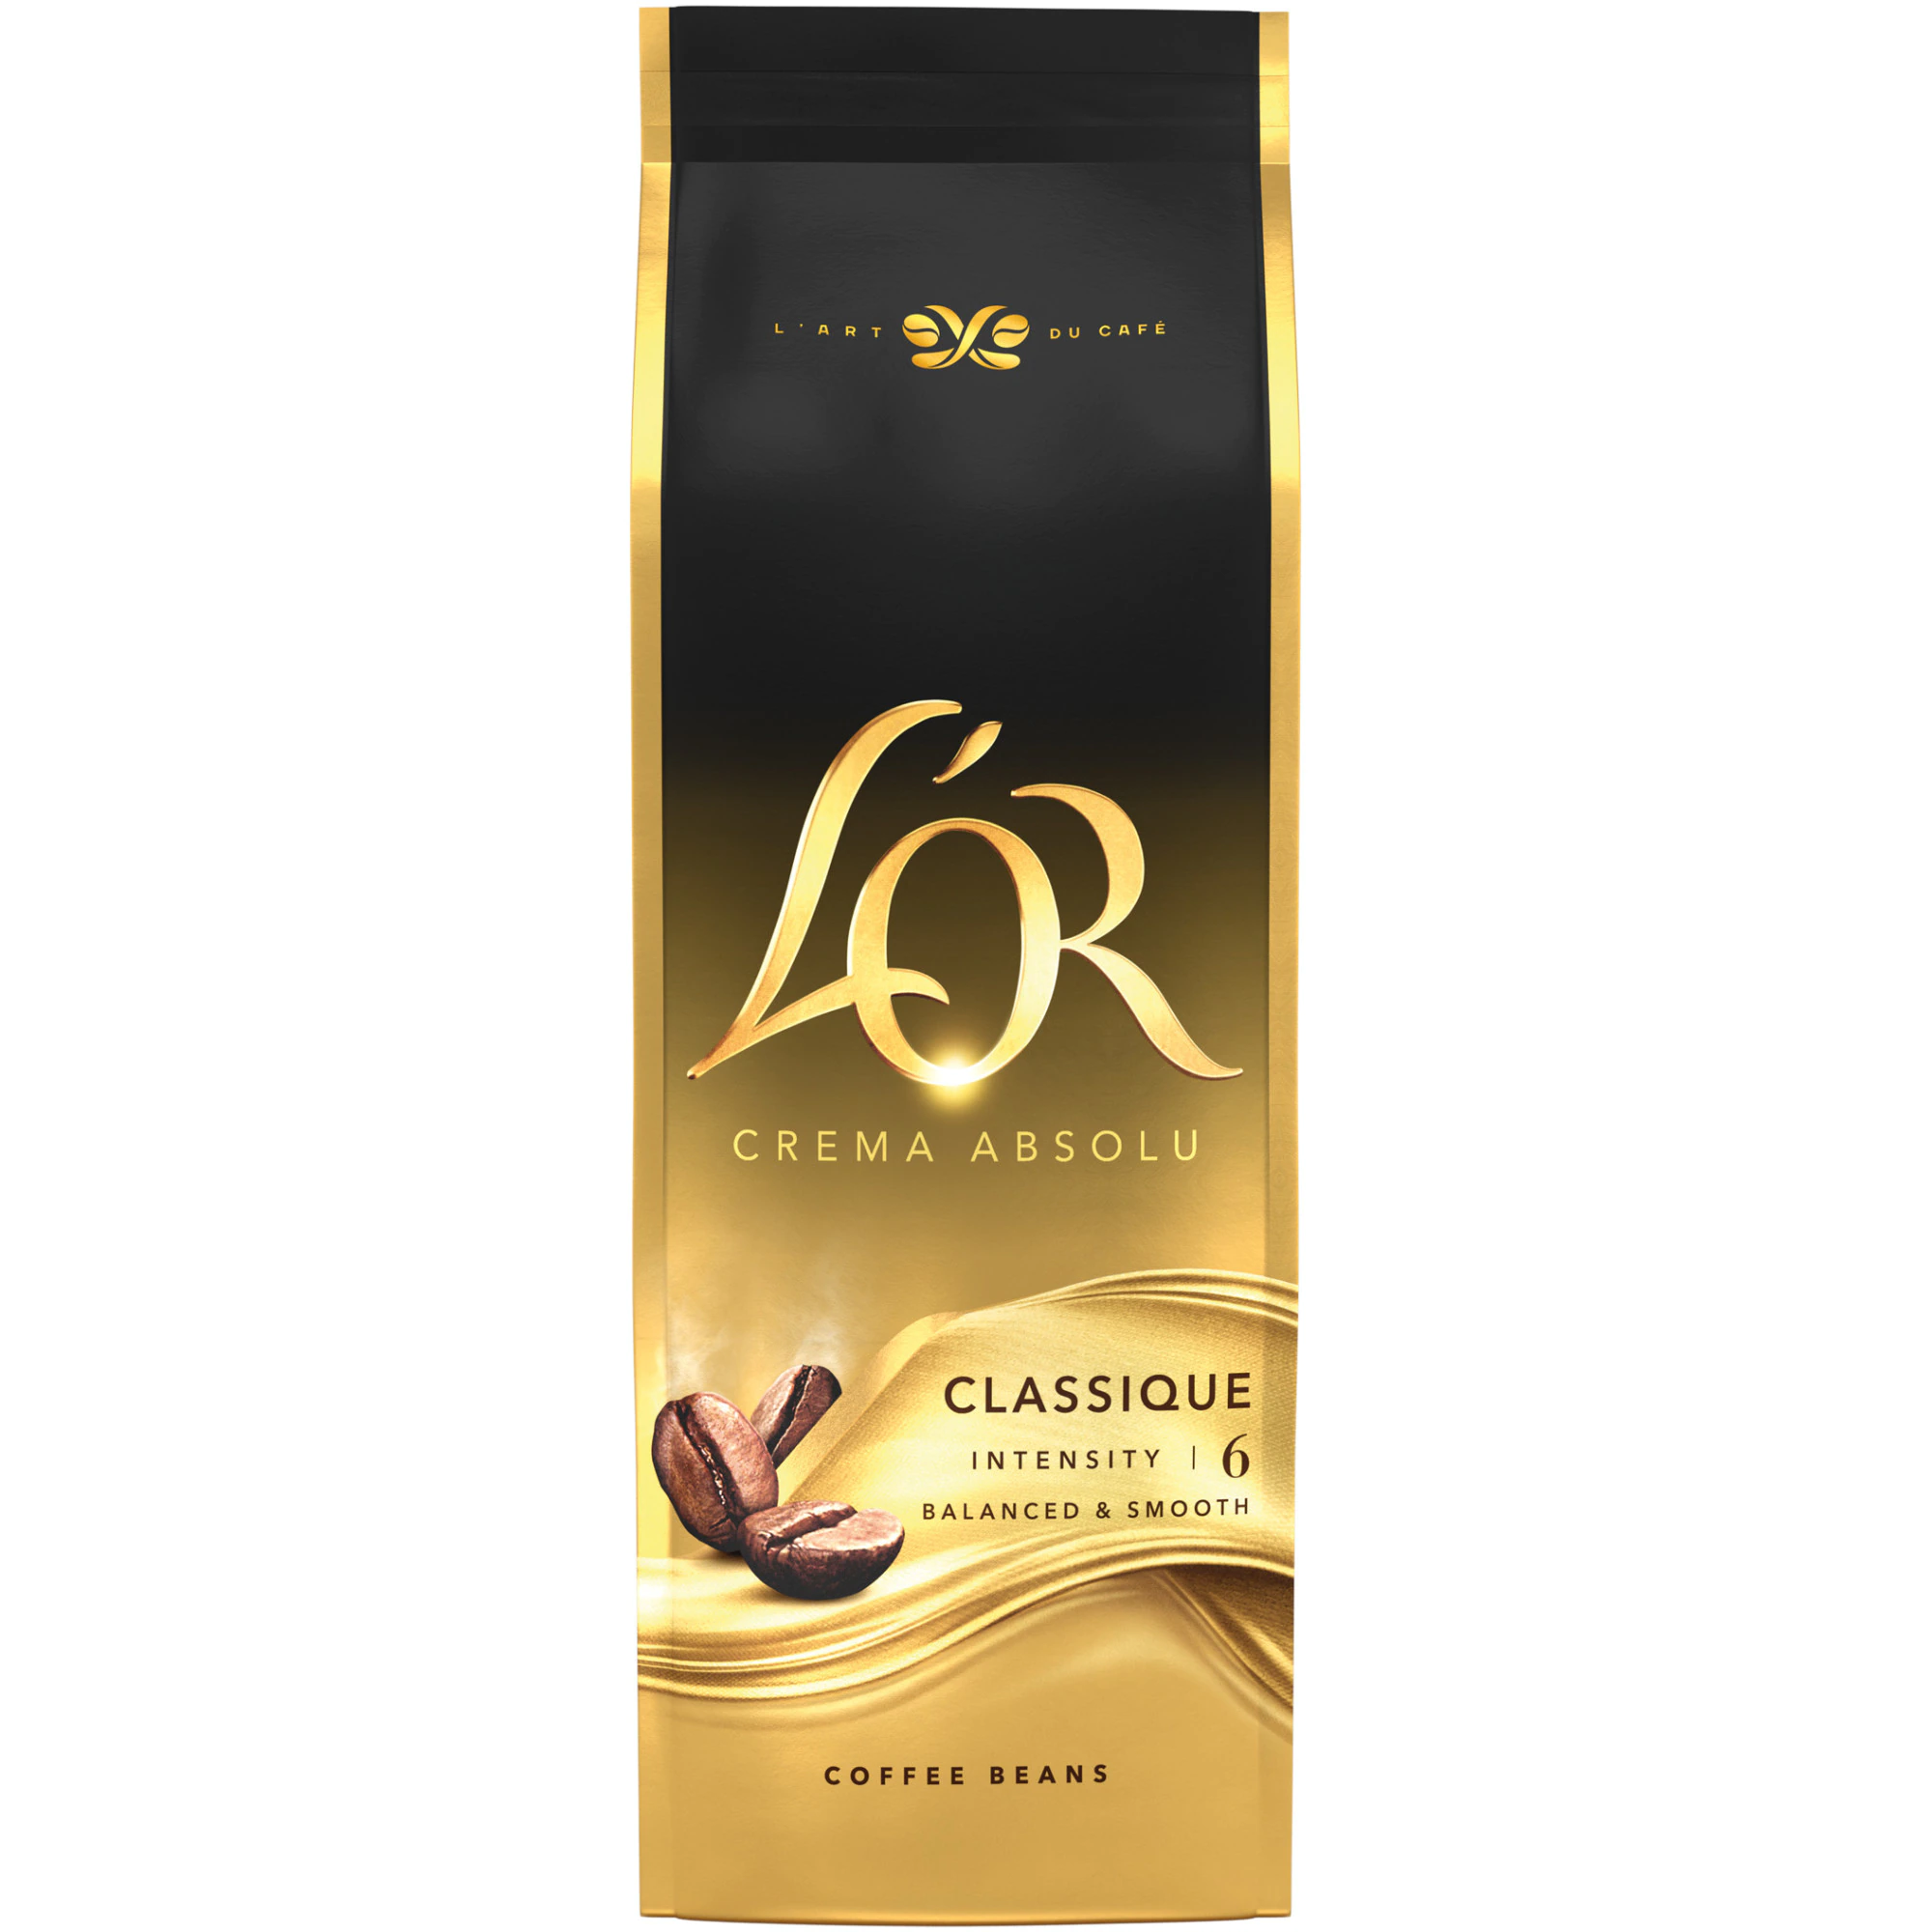 L'OR Crema Absolu Clasique Cafea Boabe 500g [1]